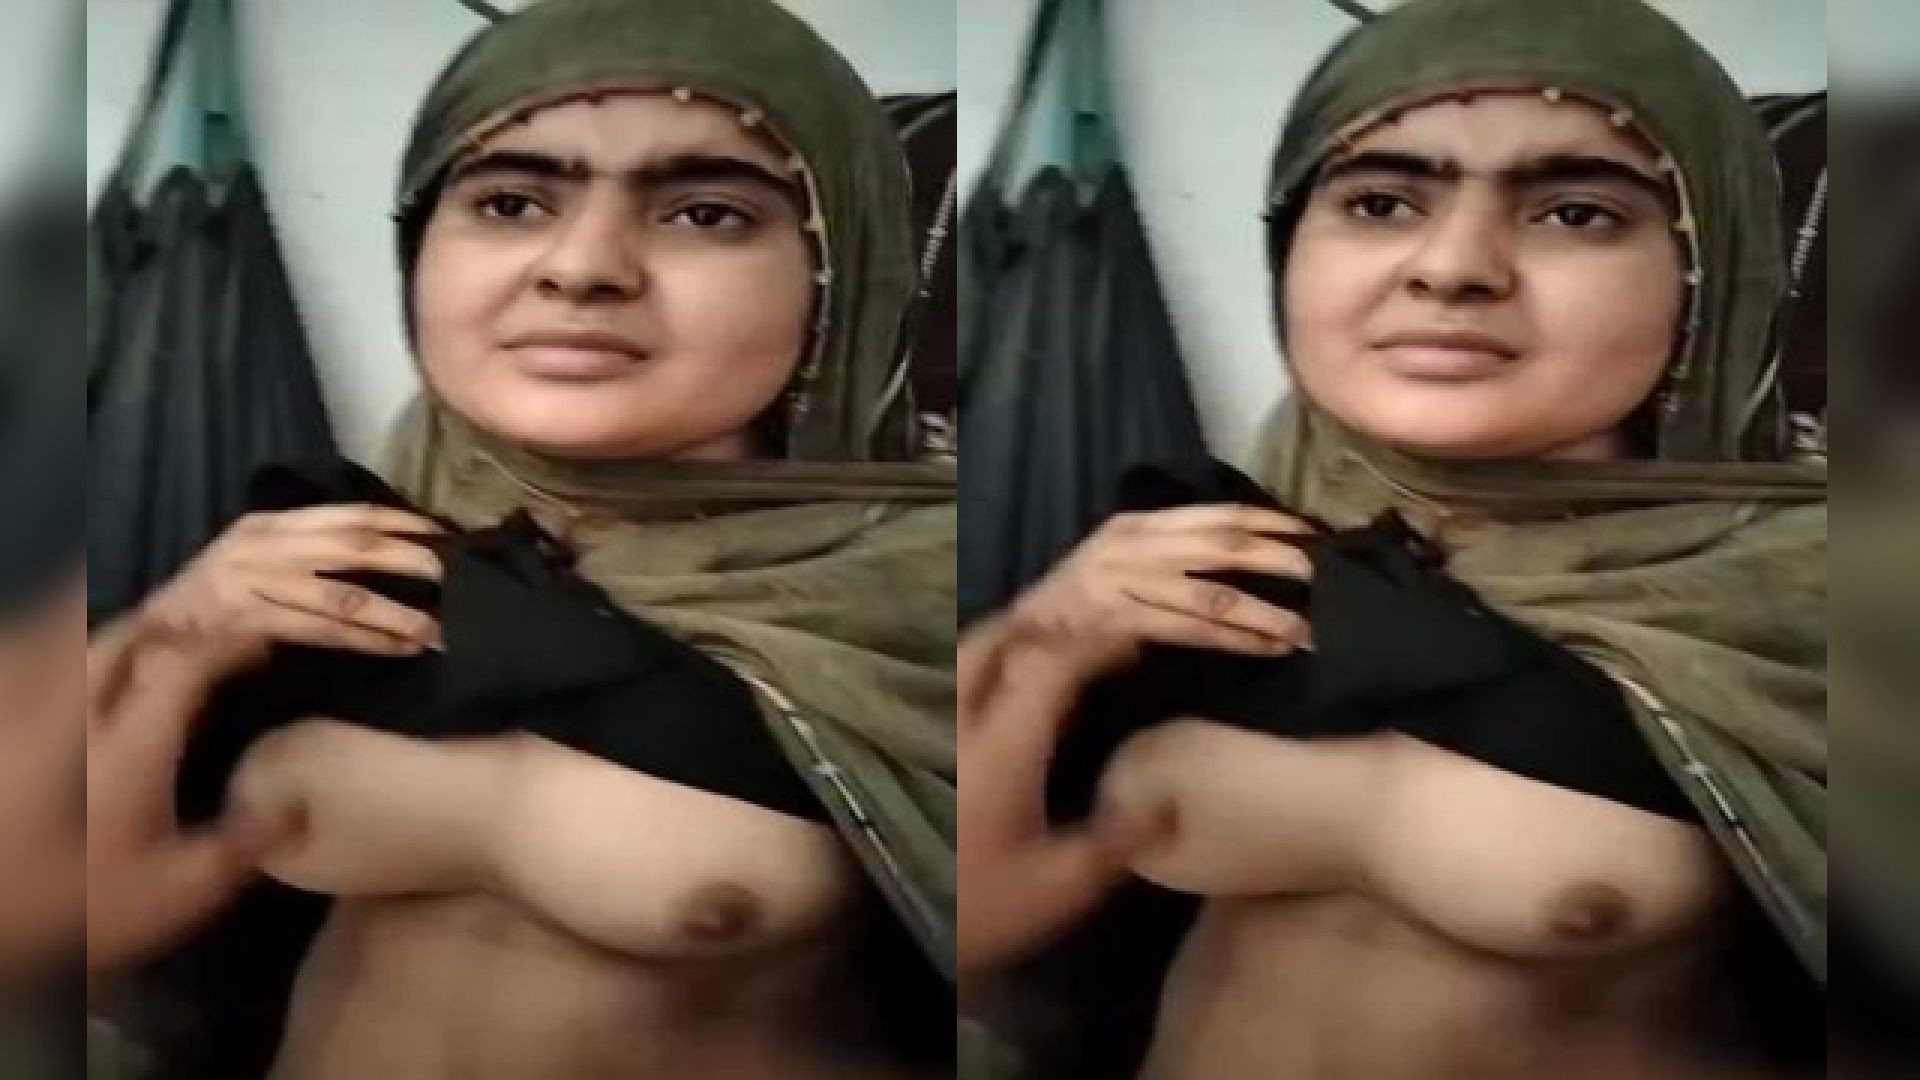 Paki Pathan girl showing boobs and pussy